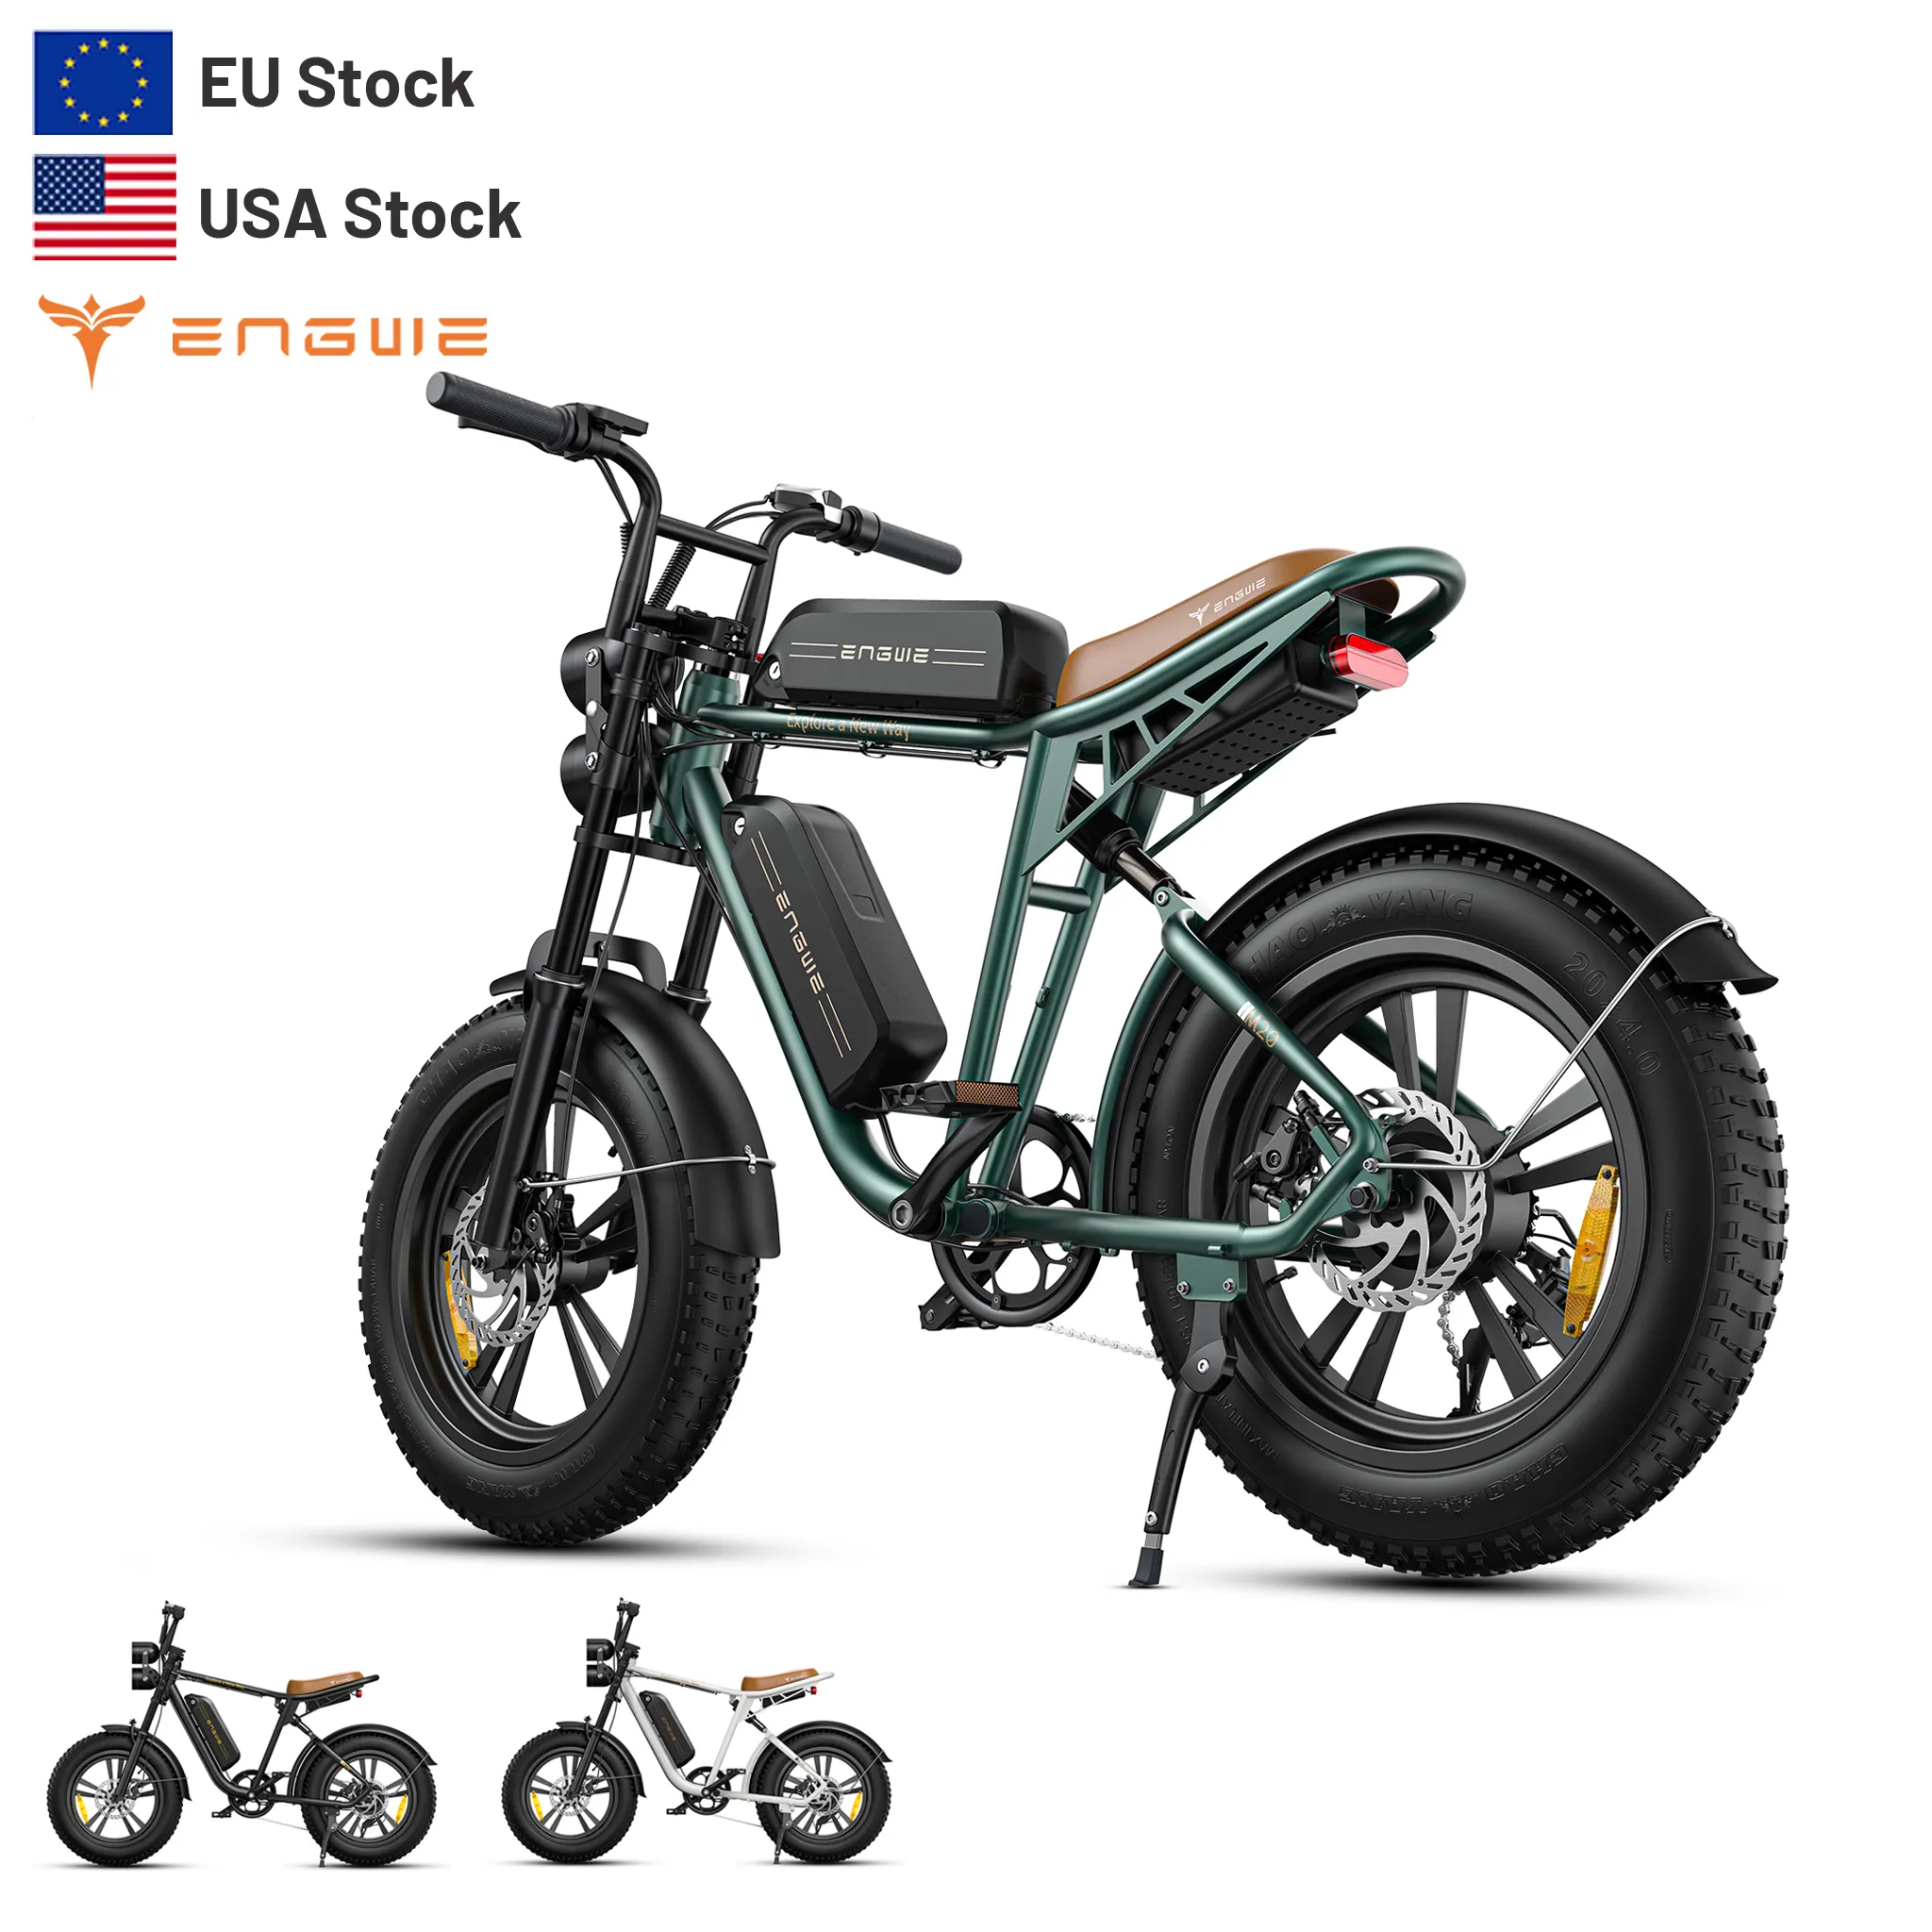 ENGWE M20 New Arrival Electric Bike 20 inch Fat Tire Bicycle 750W Full-shock Moped Style E-Bikes